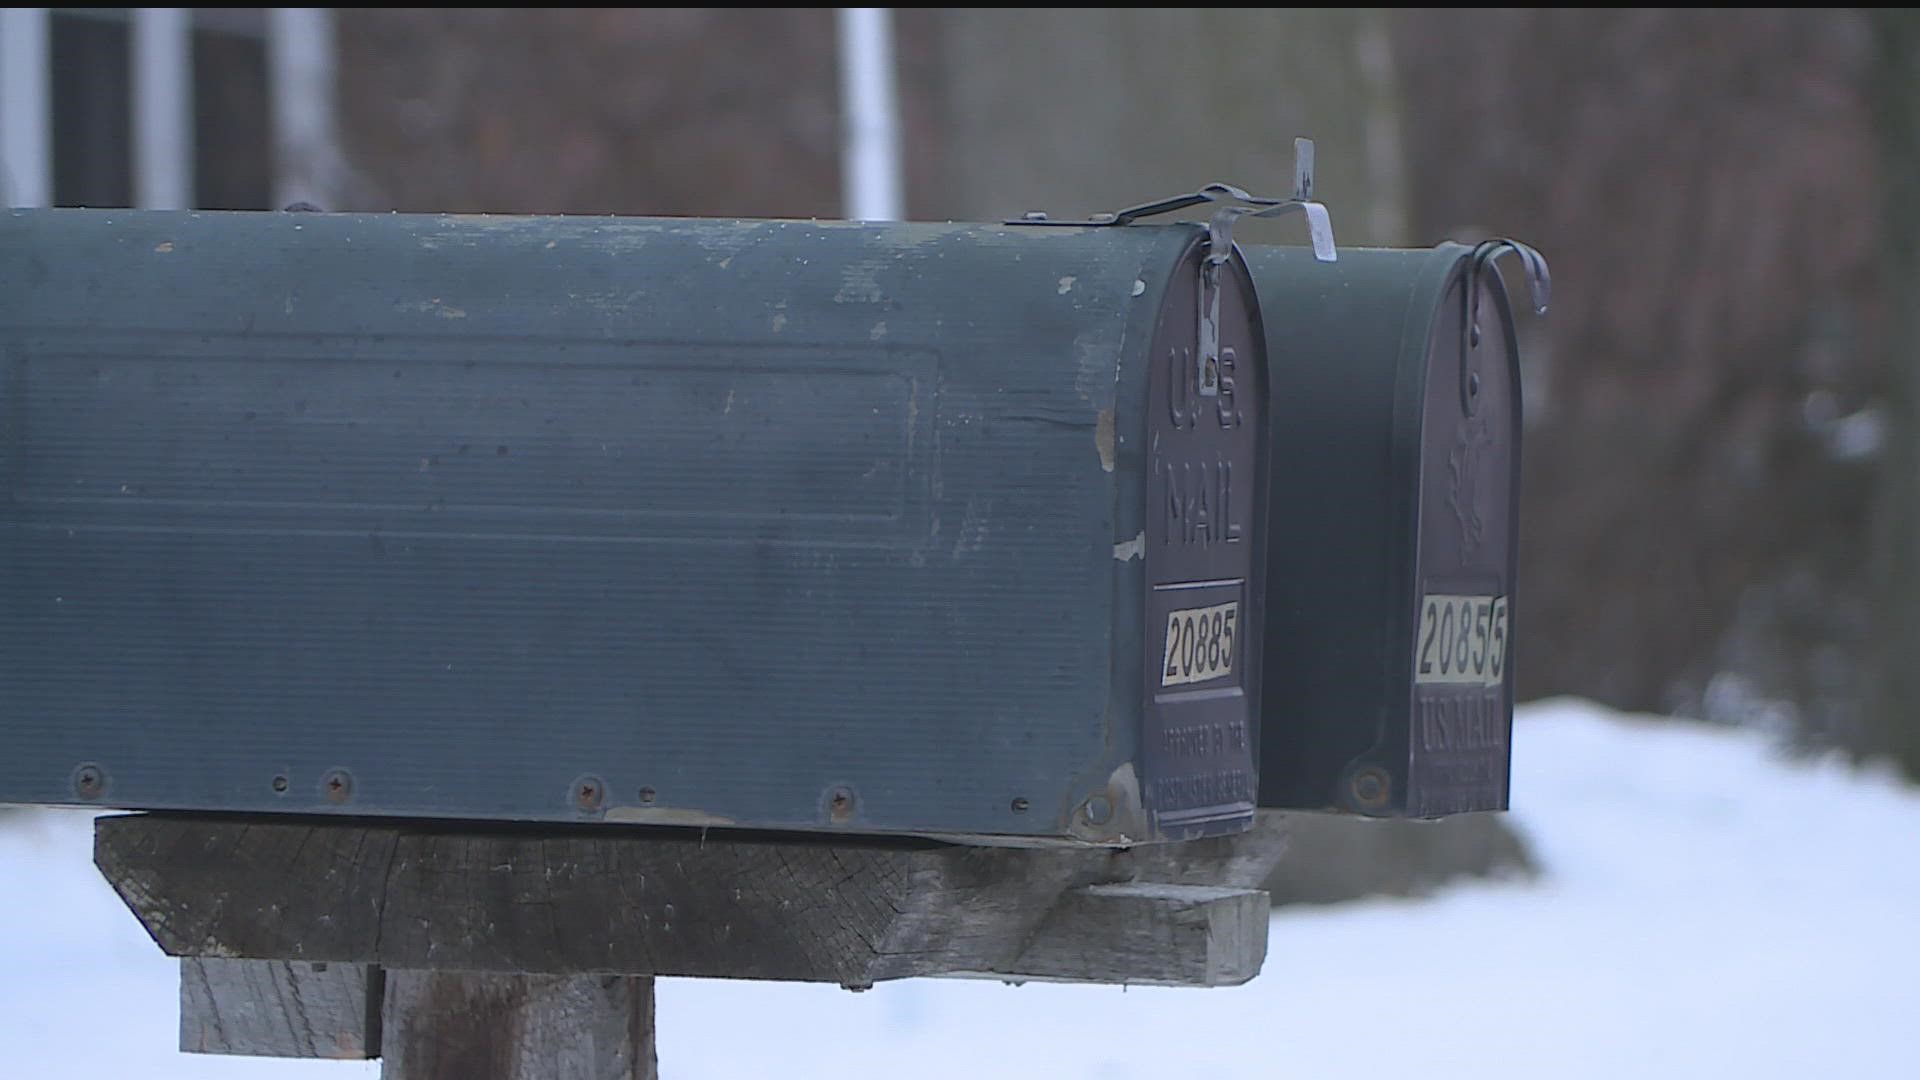 Sen. Klobuchar and Rep. Craig are both pressing the U.S. Postal Service for answers, following more reports of mail delays.